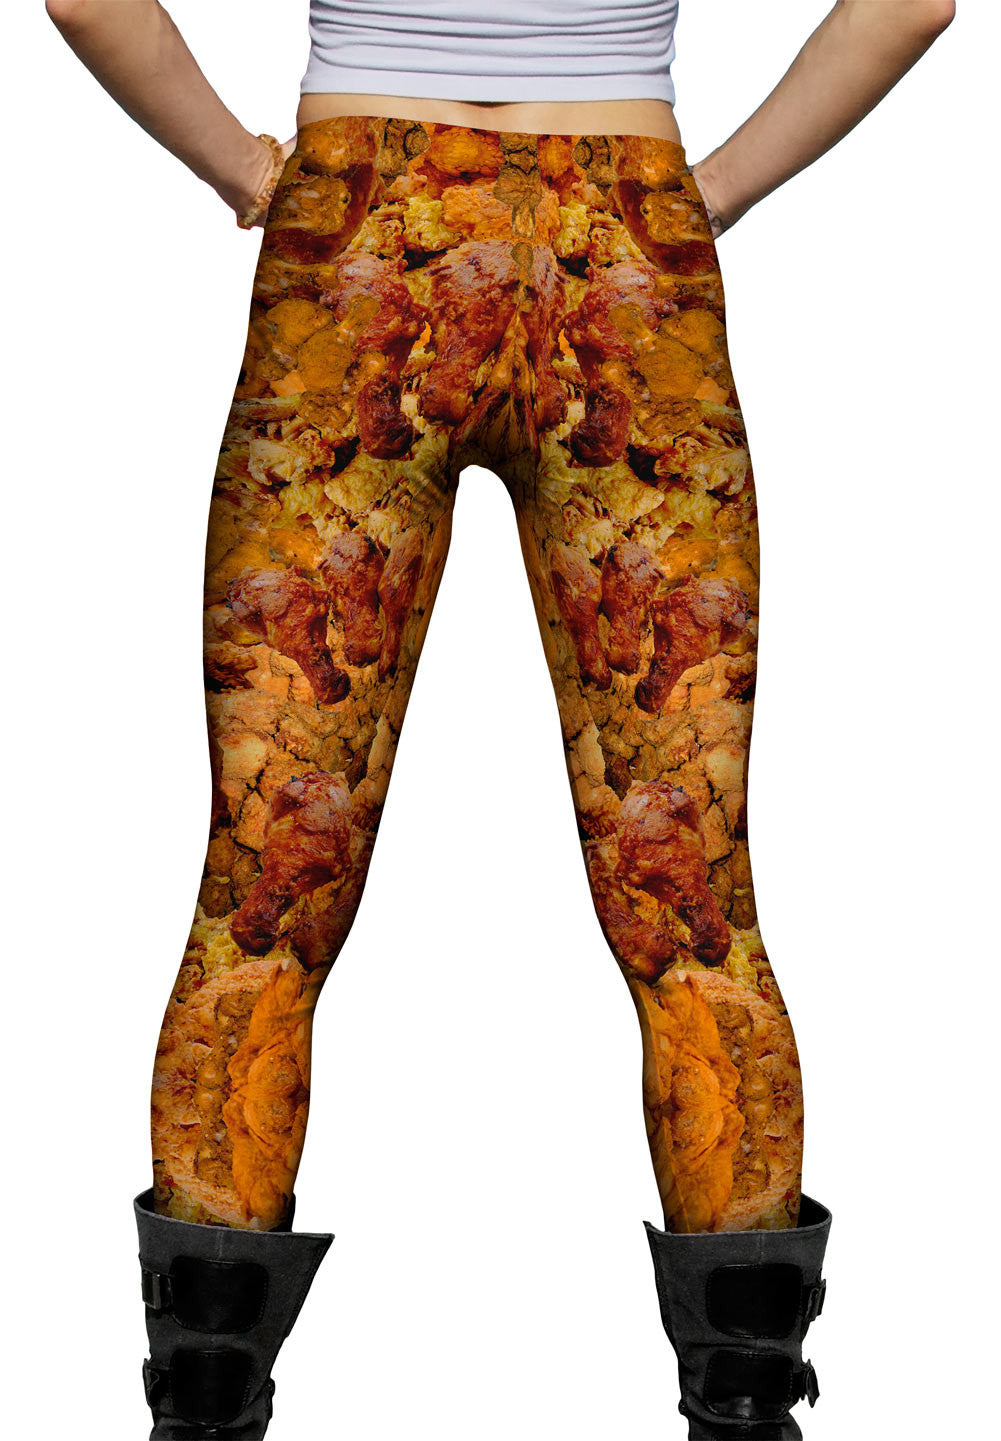 Womens Leggings, Chicken Rooster Leggings, Yoga Pant, Footless Tights, MomMe and More